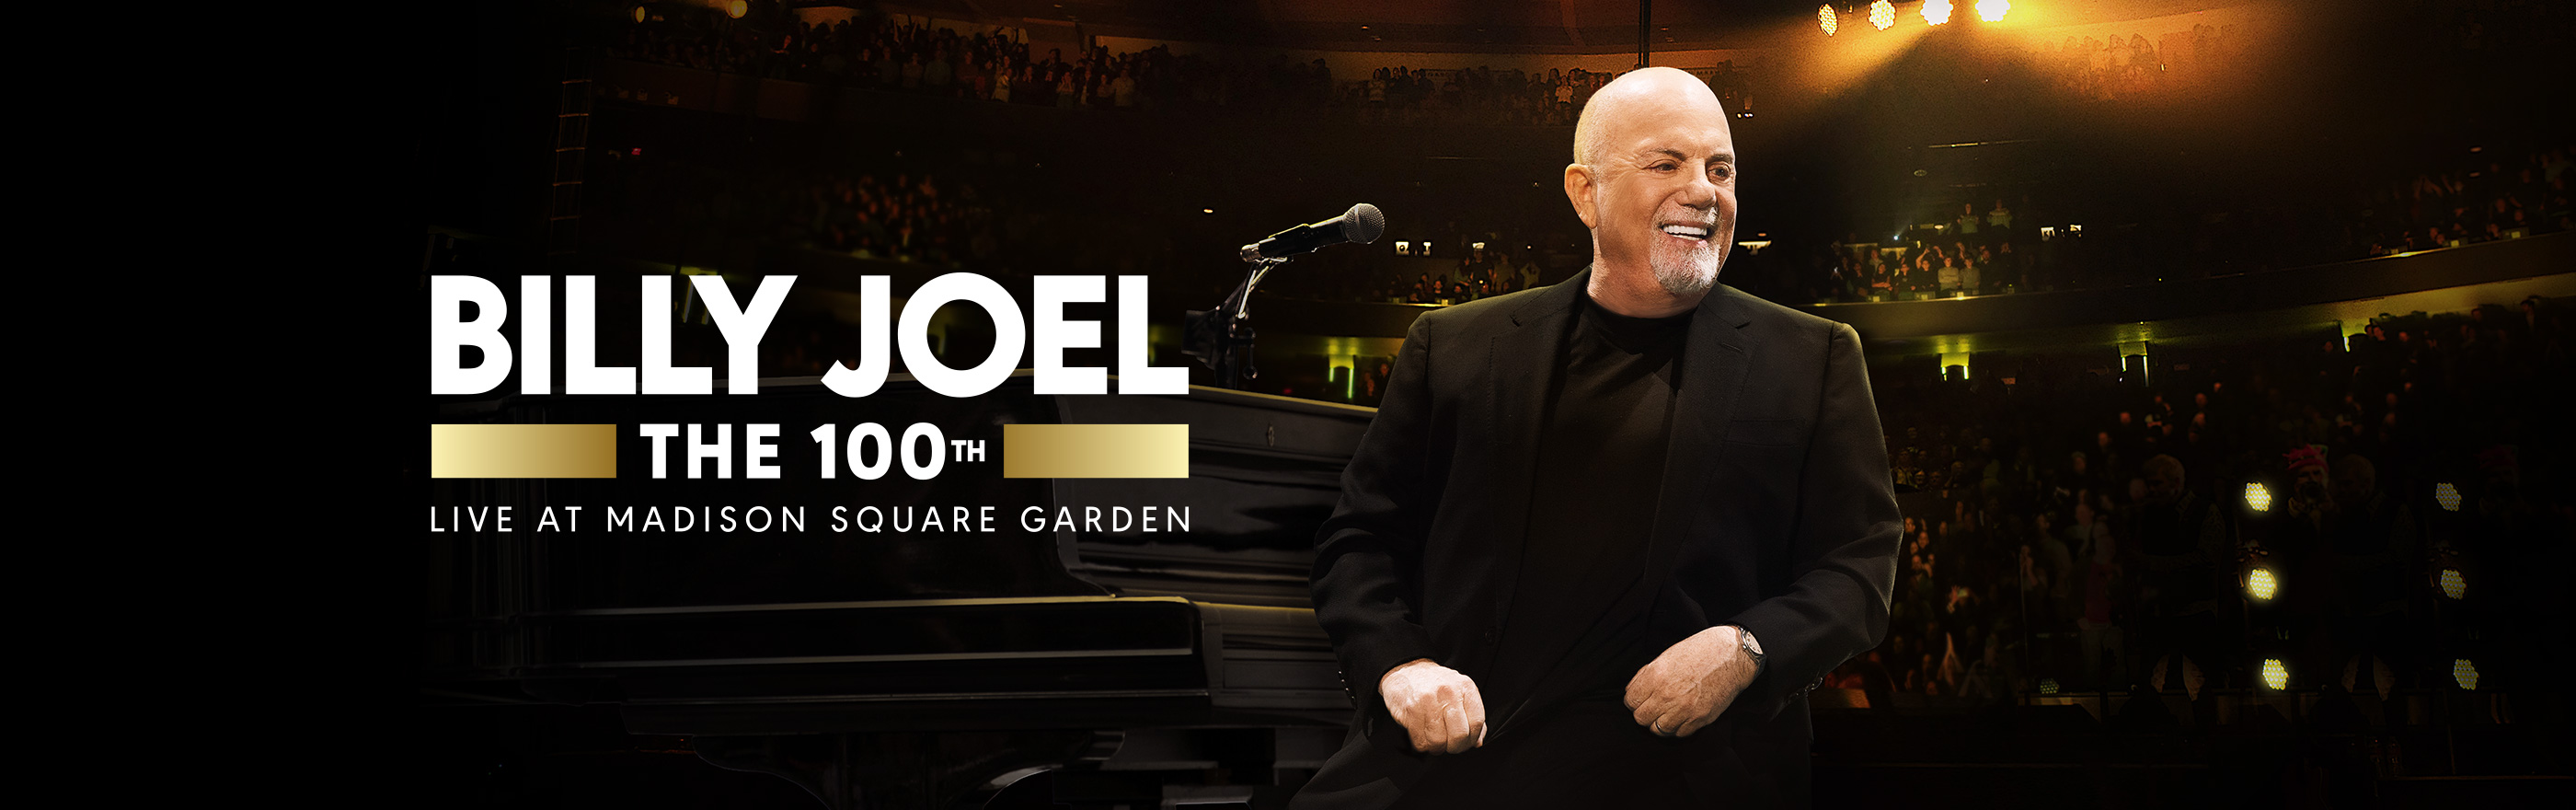 Billy Joel: The 100th - Live at Madison Square Garden LOGO